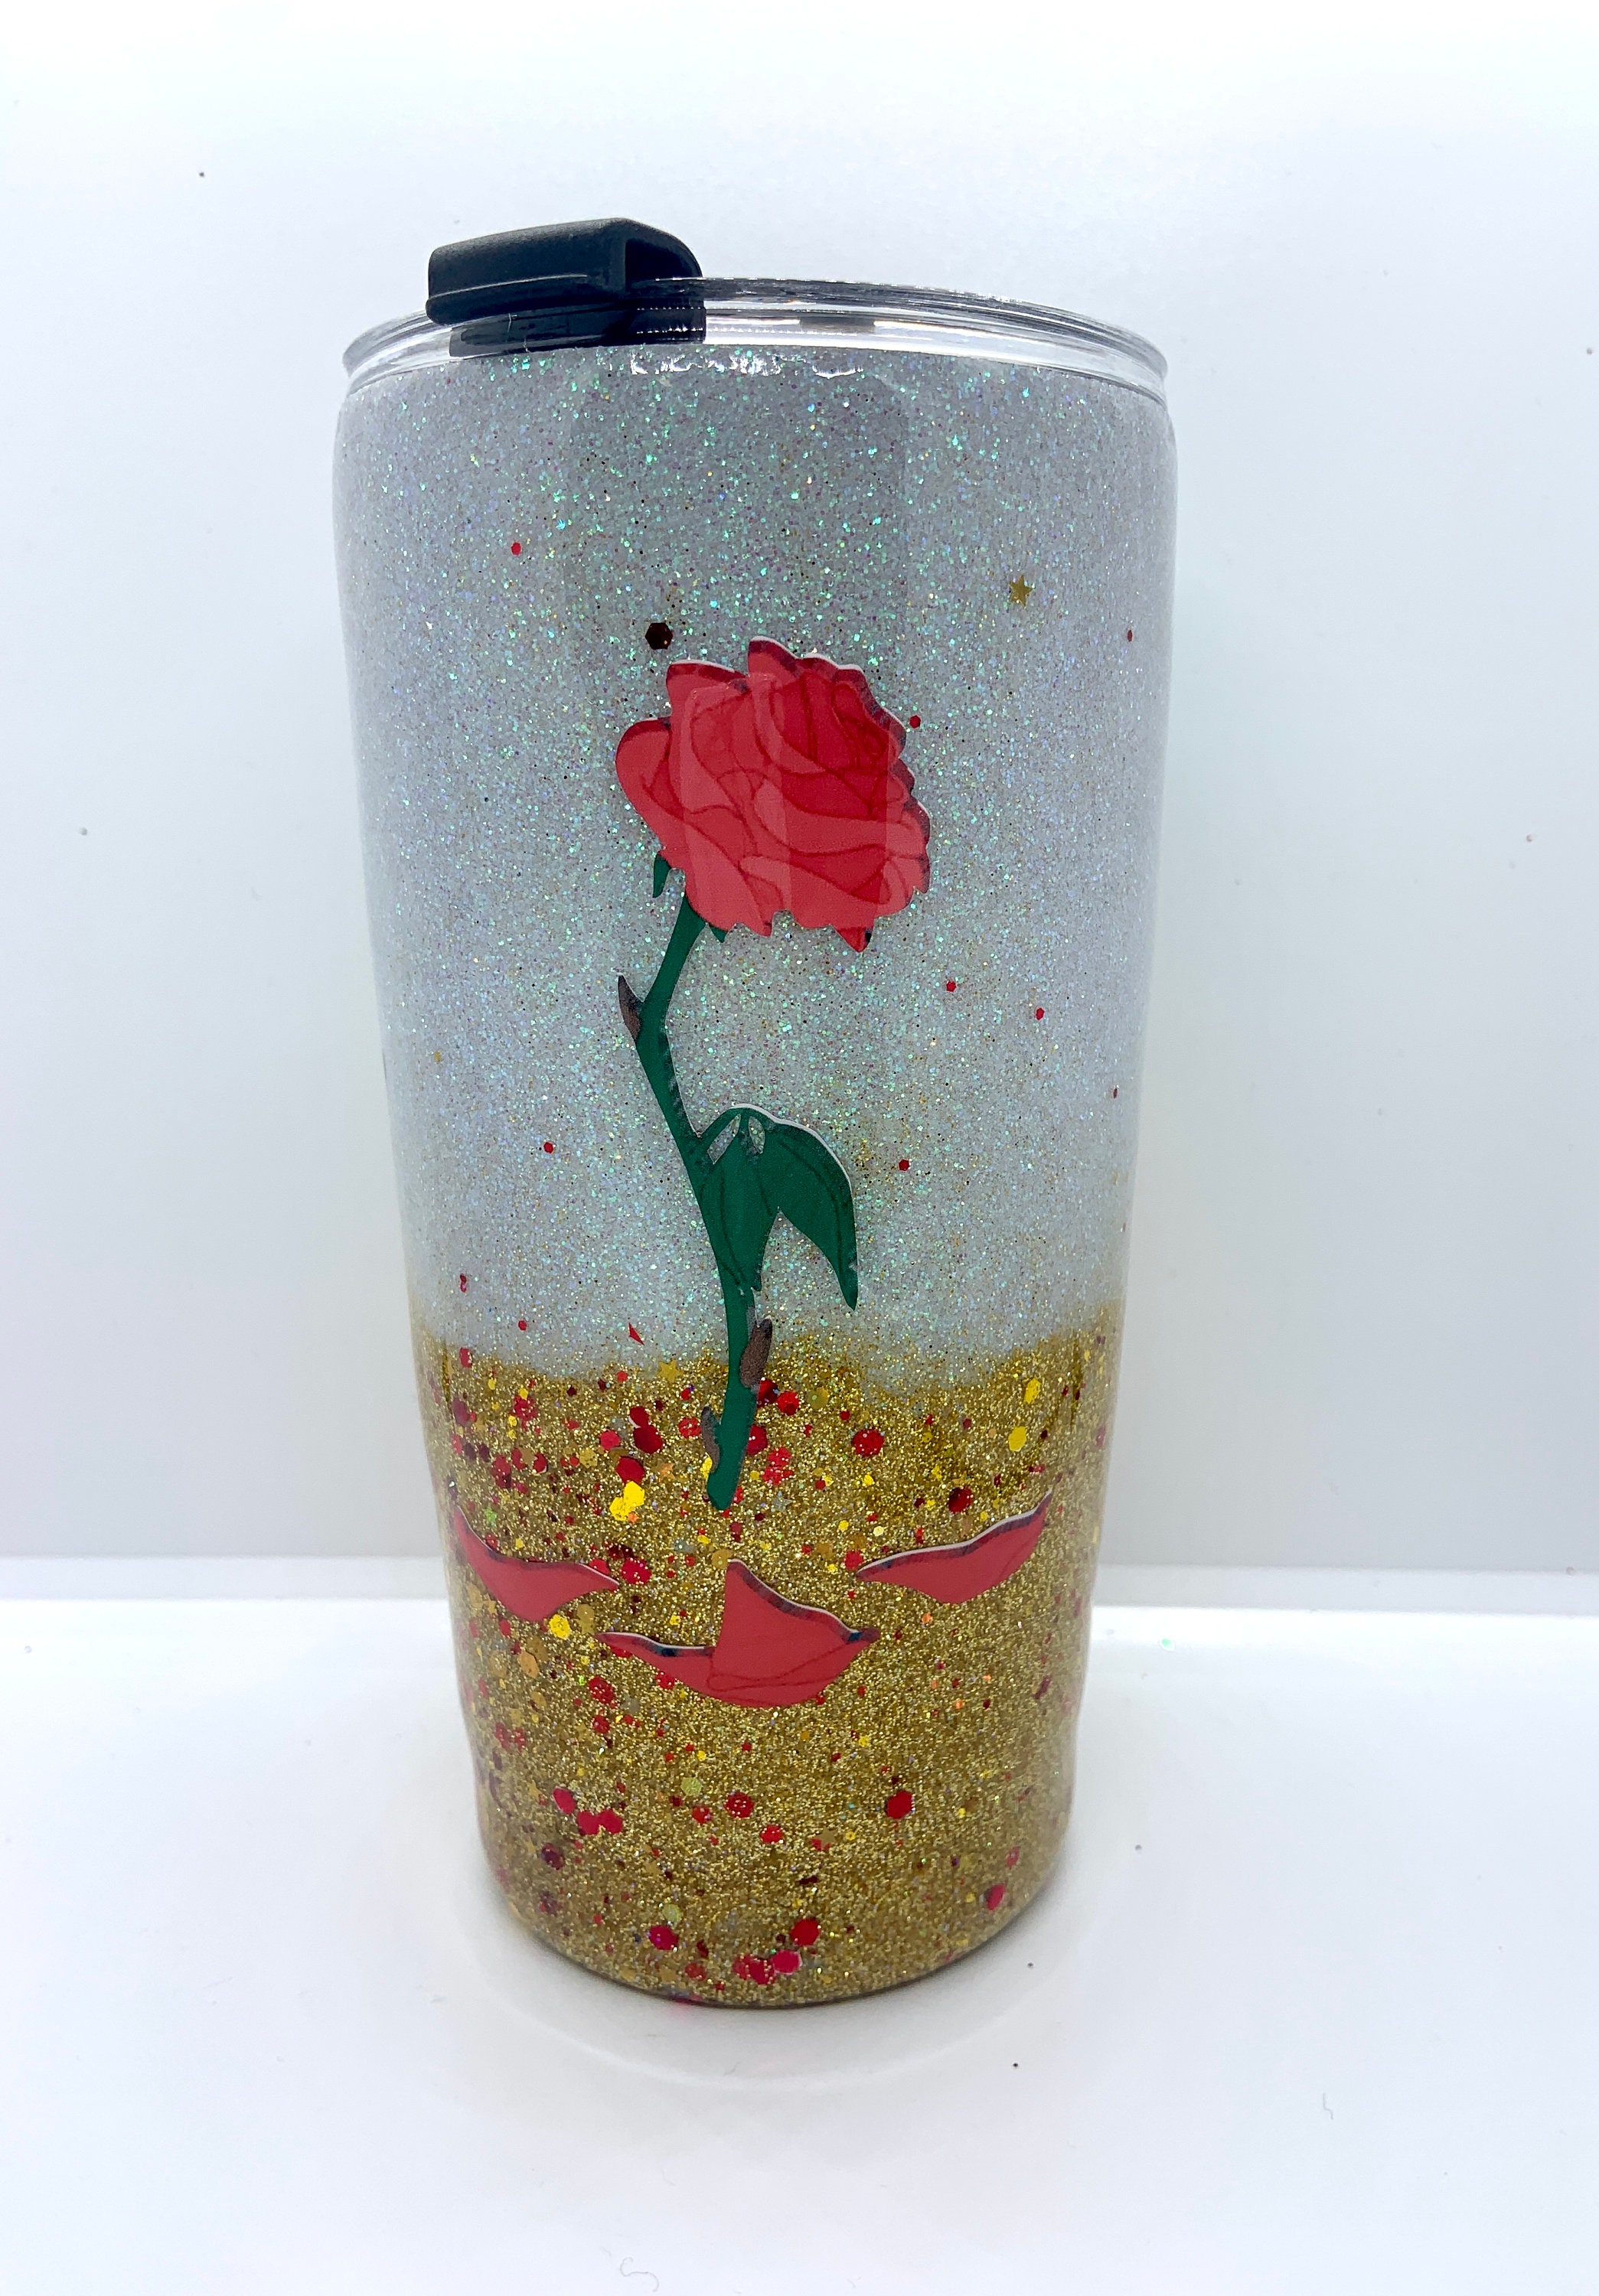 Beauty and the Beast Inspired Glitter Tumbler · Root Of All Creations ·  Online Store Powered by Storenvy